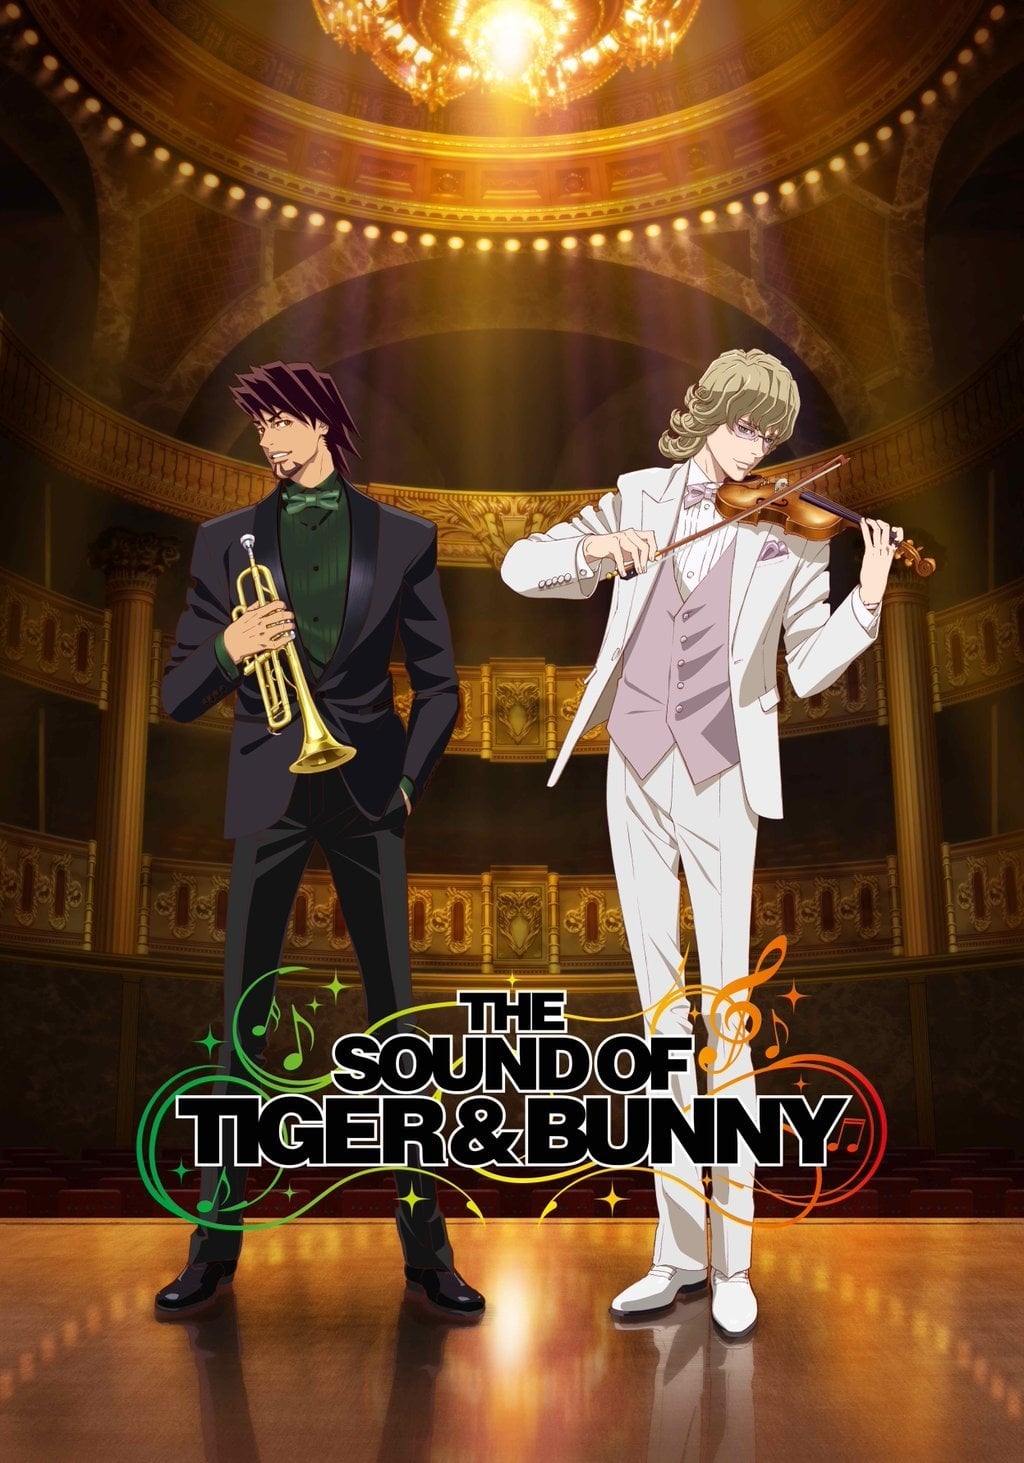 The Sound of Tiger & Bunny (2015)